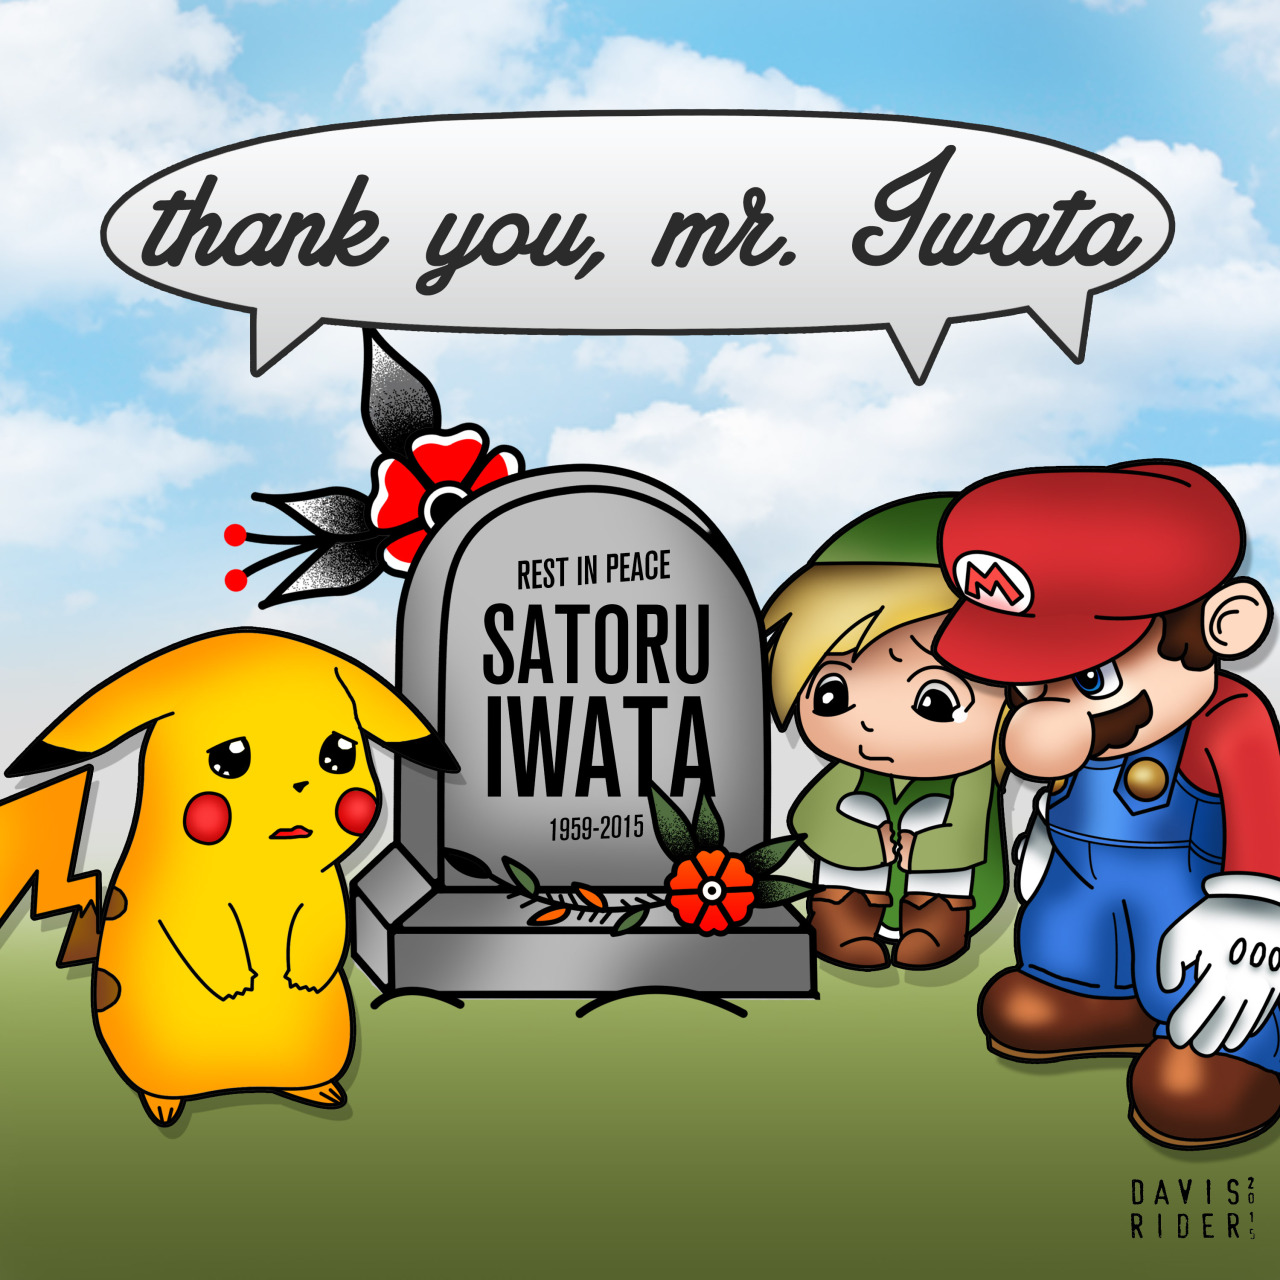 The Art Of Davis Rider Thank You Mr Iwata Rest In Peace